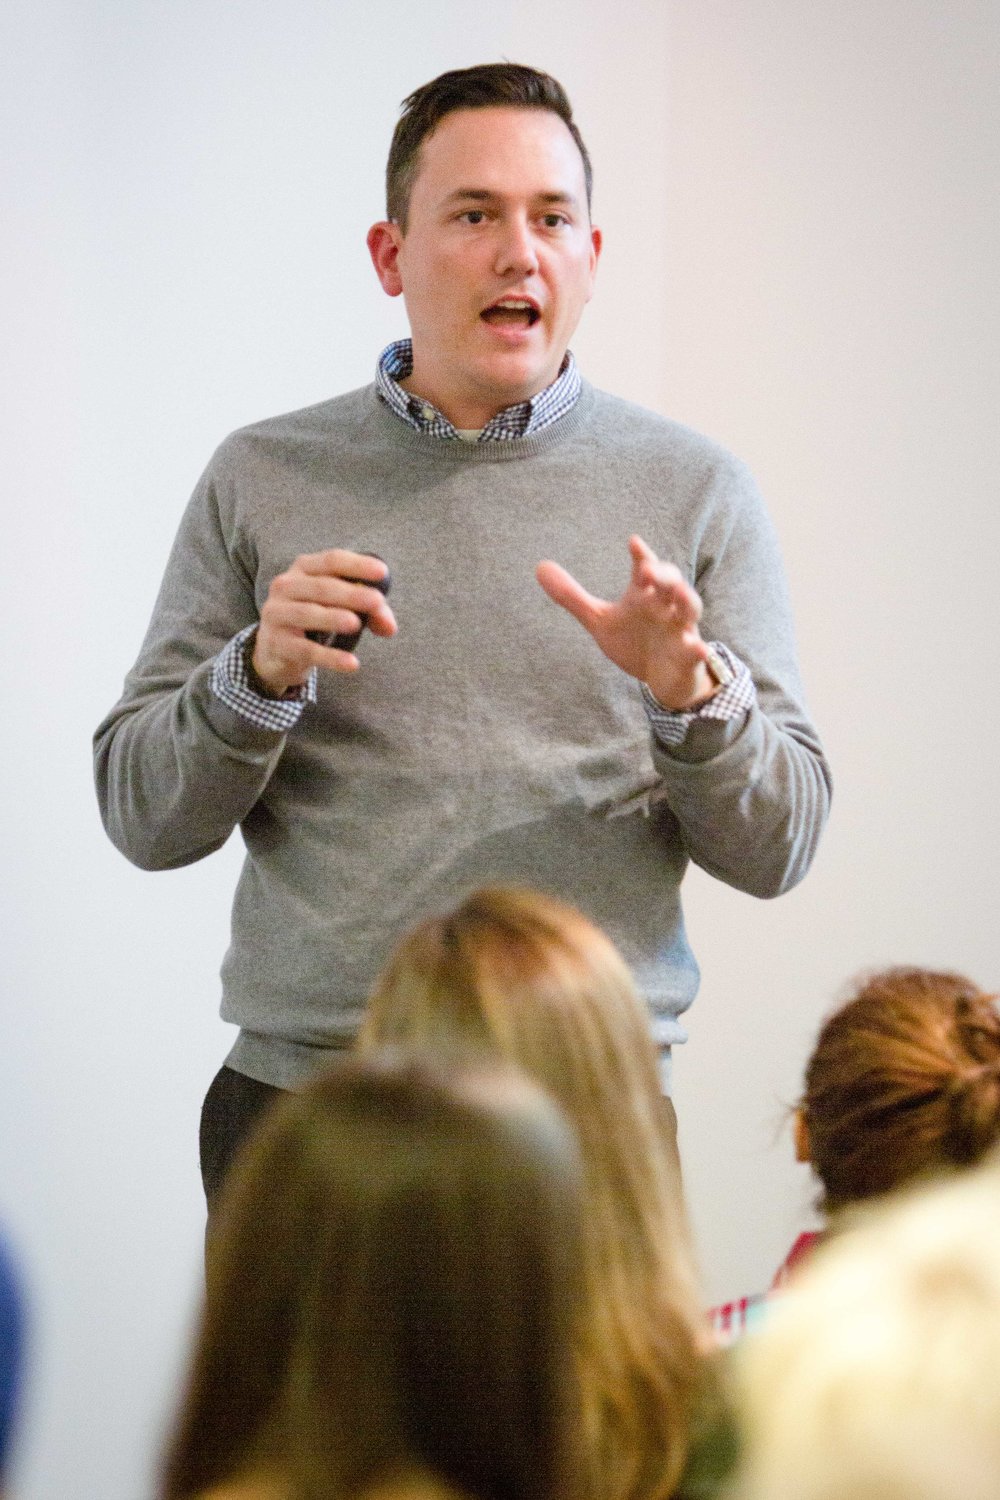 Assistant professor of English John Pell speaks to students about scholarship in pop culture. Janik Emmendorfer | Photographer 